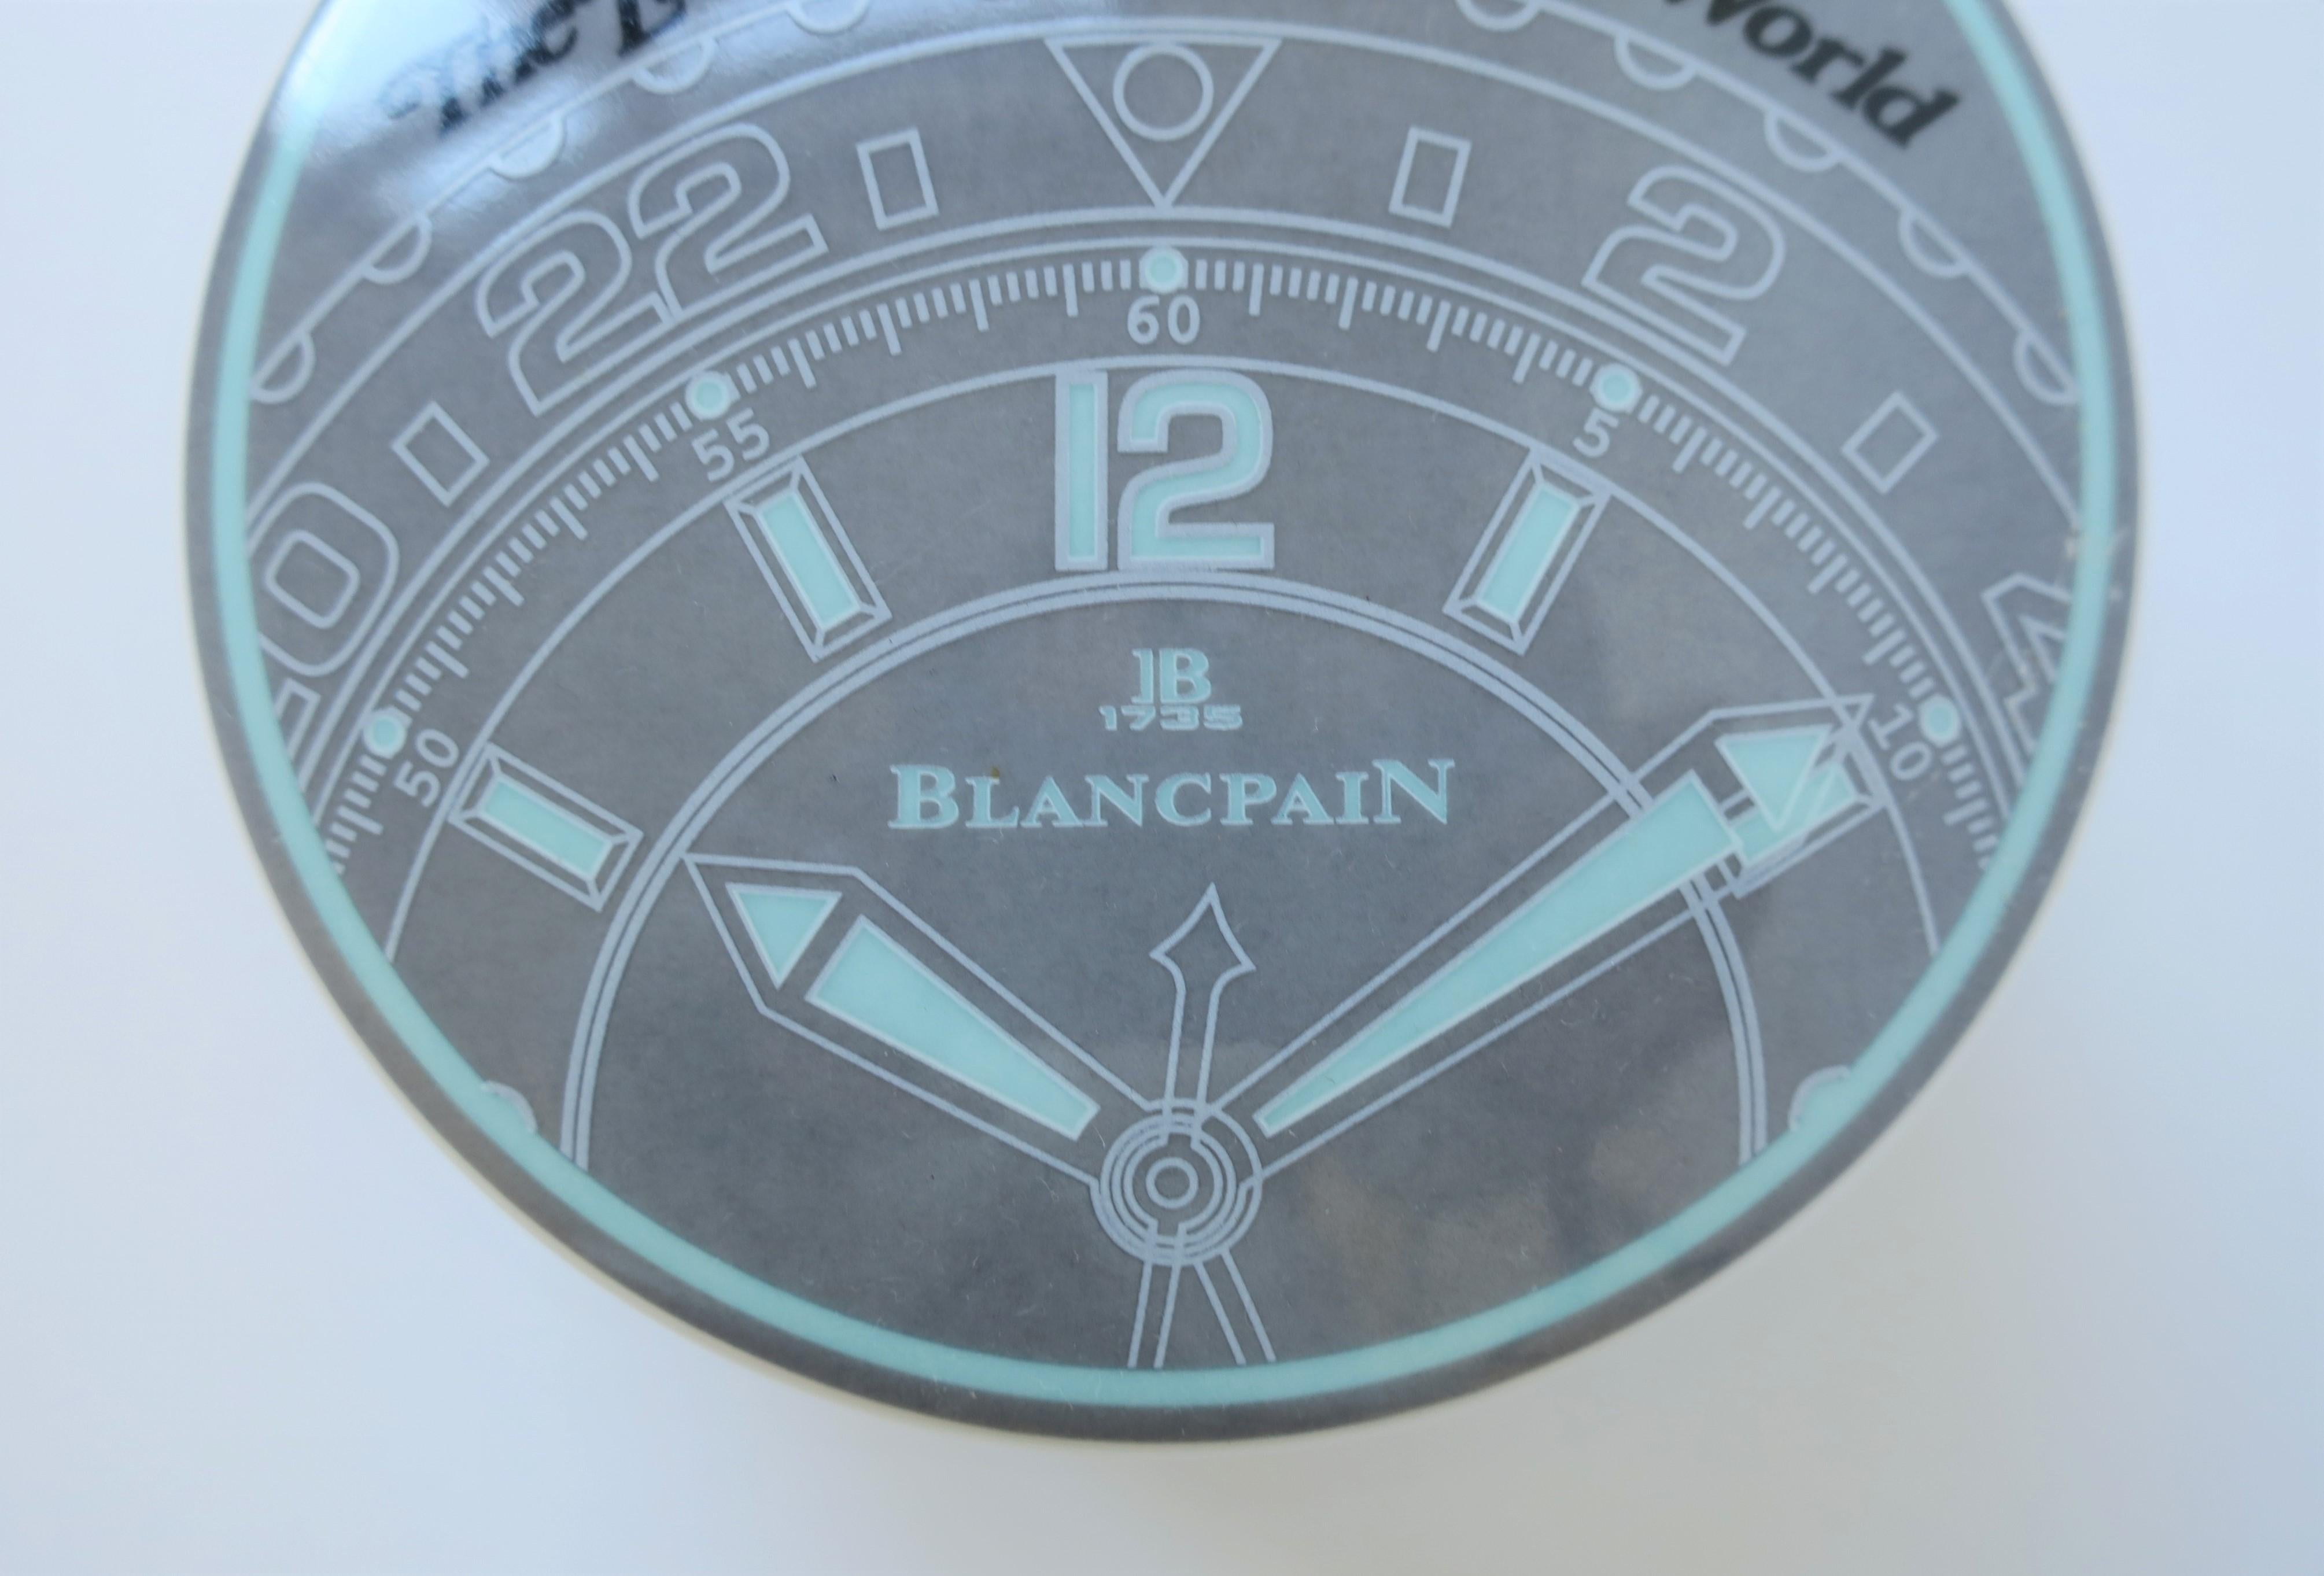 Luxembourgish Blancpain Watch Porcelain Jewelry Box, circa 1990s For Sale